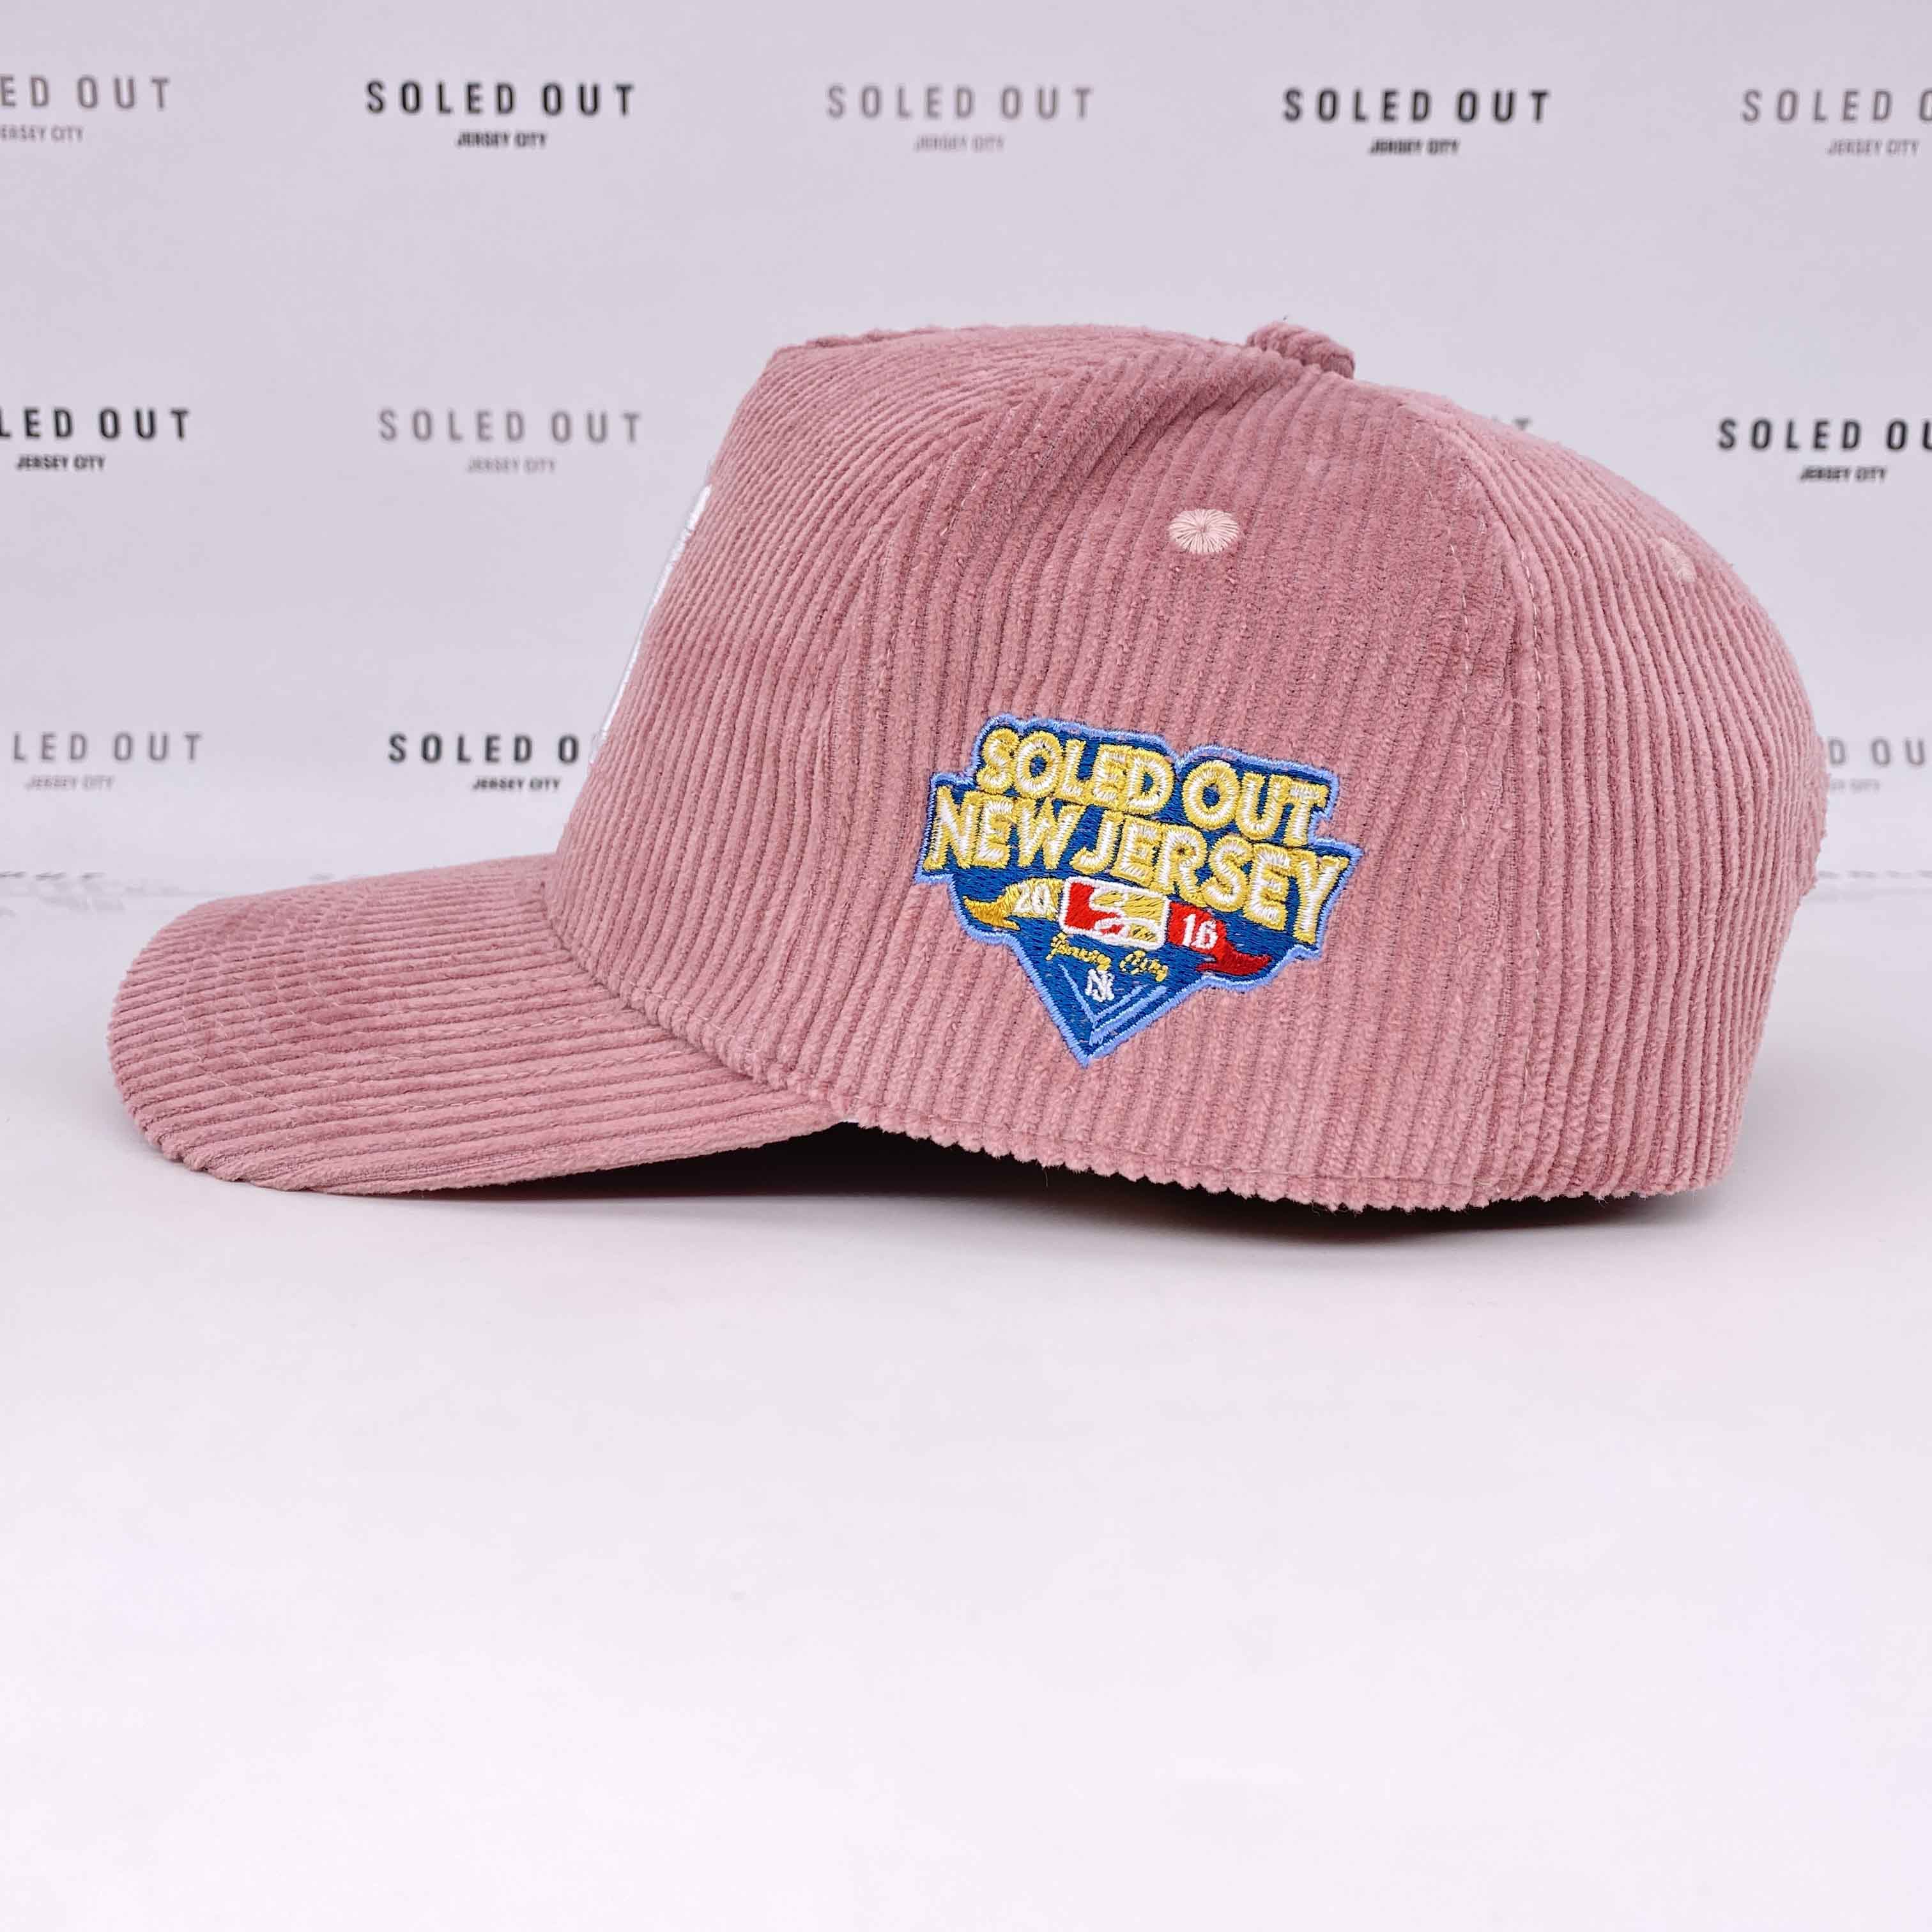 Soled Out Snapback "CORDUROY SALMON" 2022 New Size OS